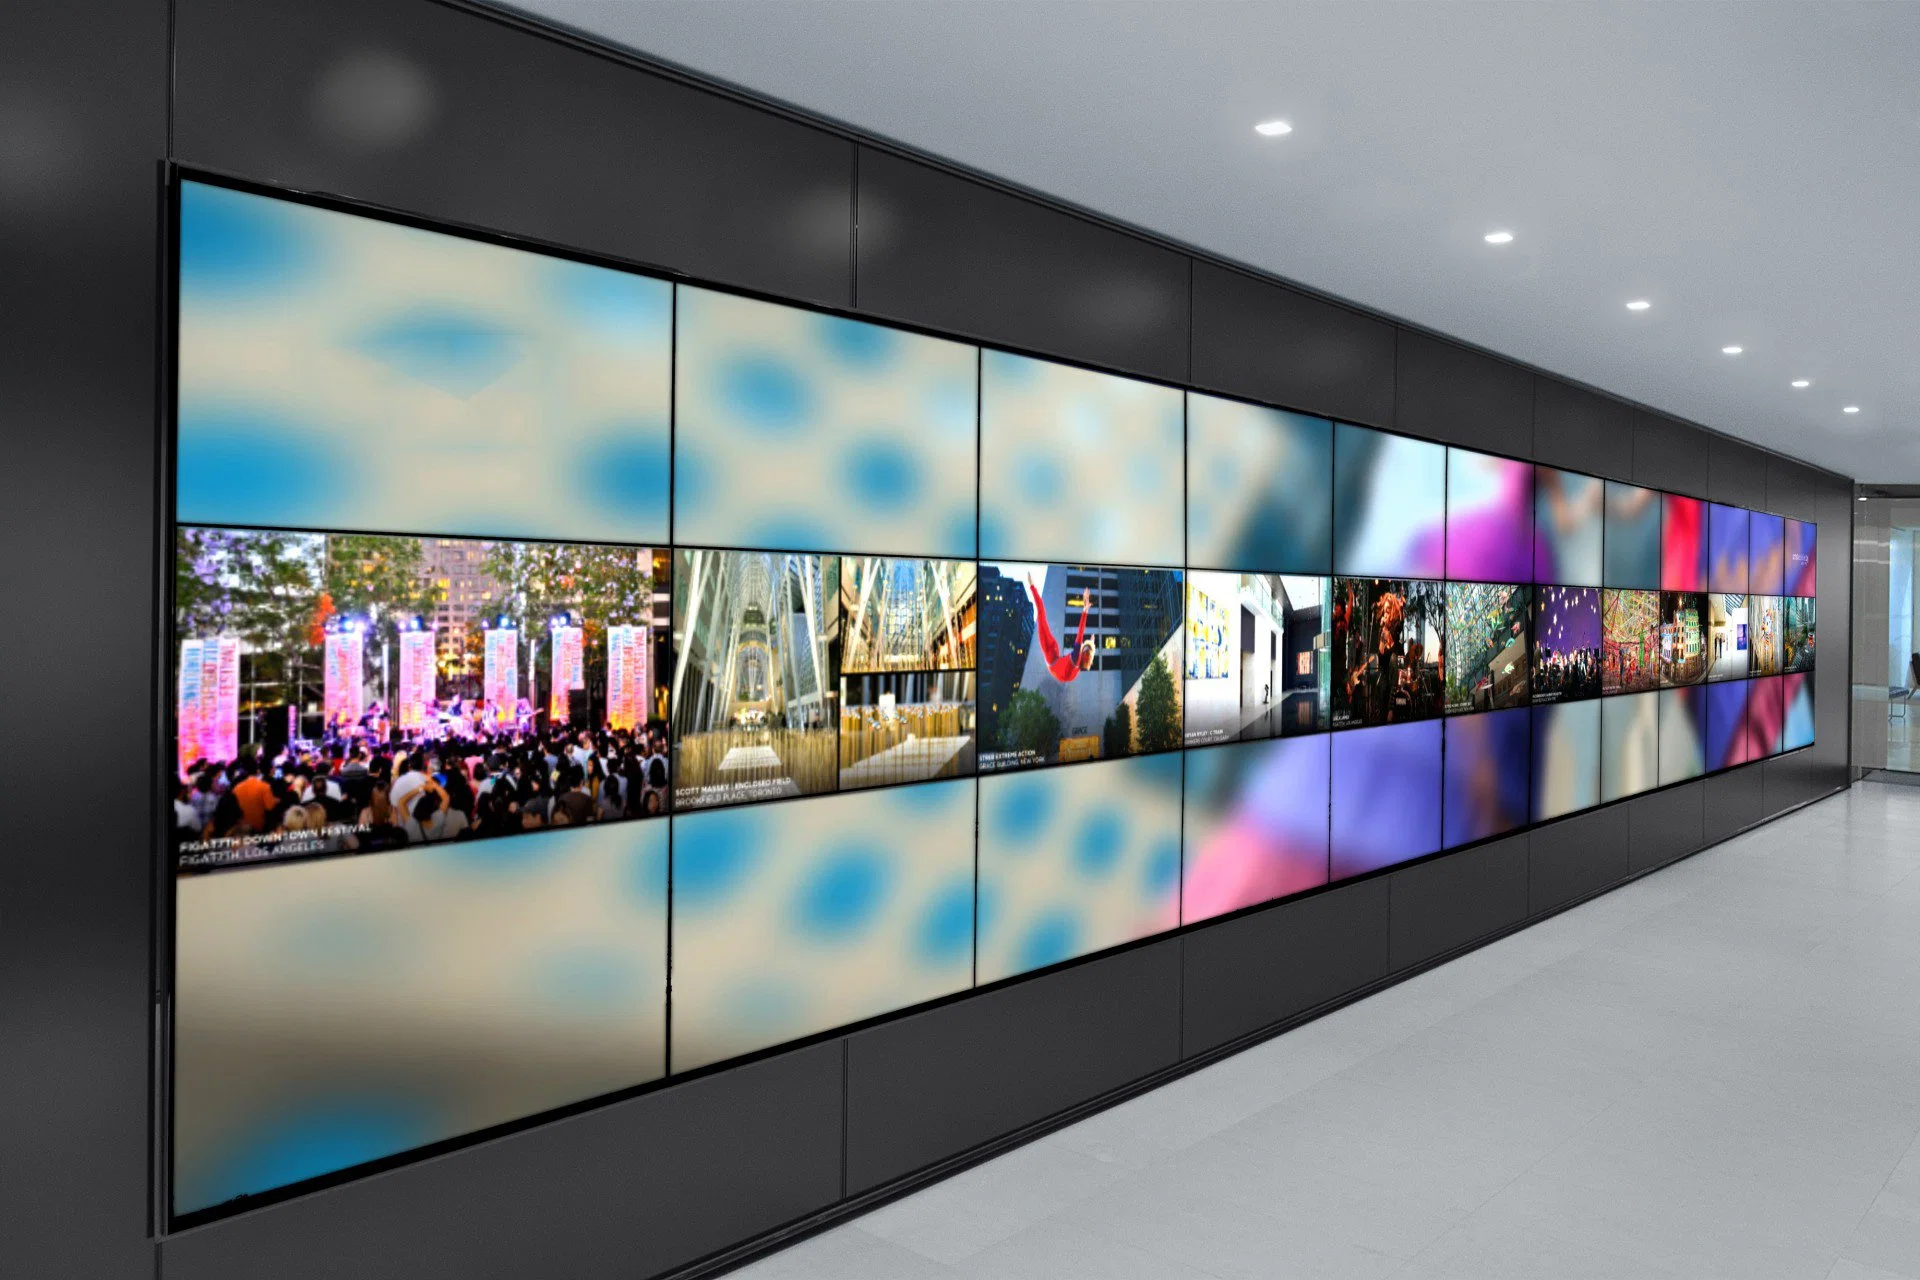 China Price 55inch 3.5mm Bezel Digital Signage and Displays LCD Video Wall Price